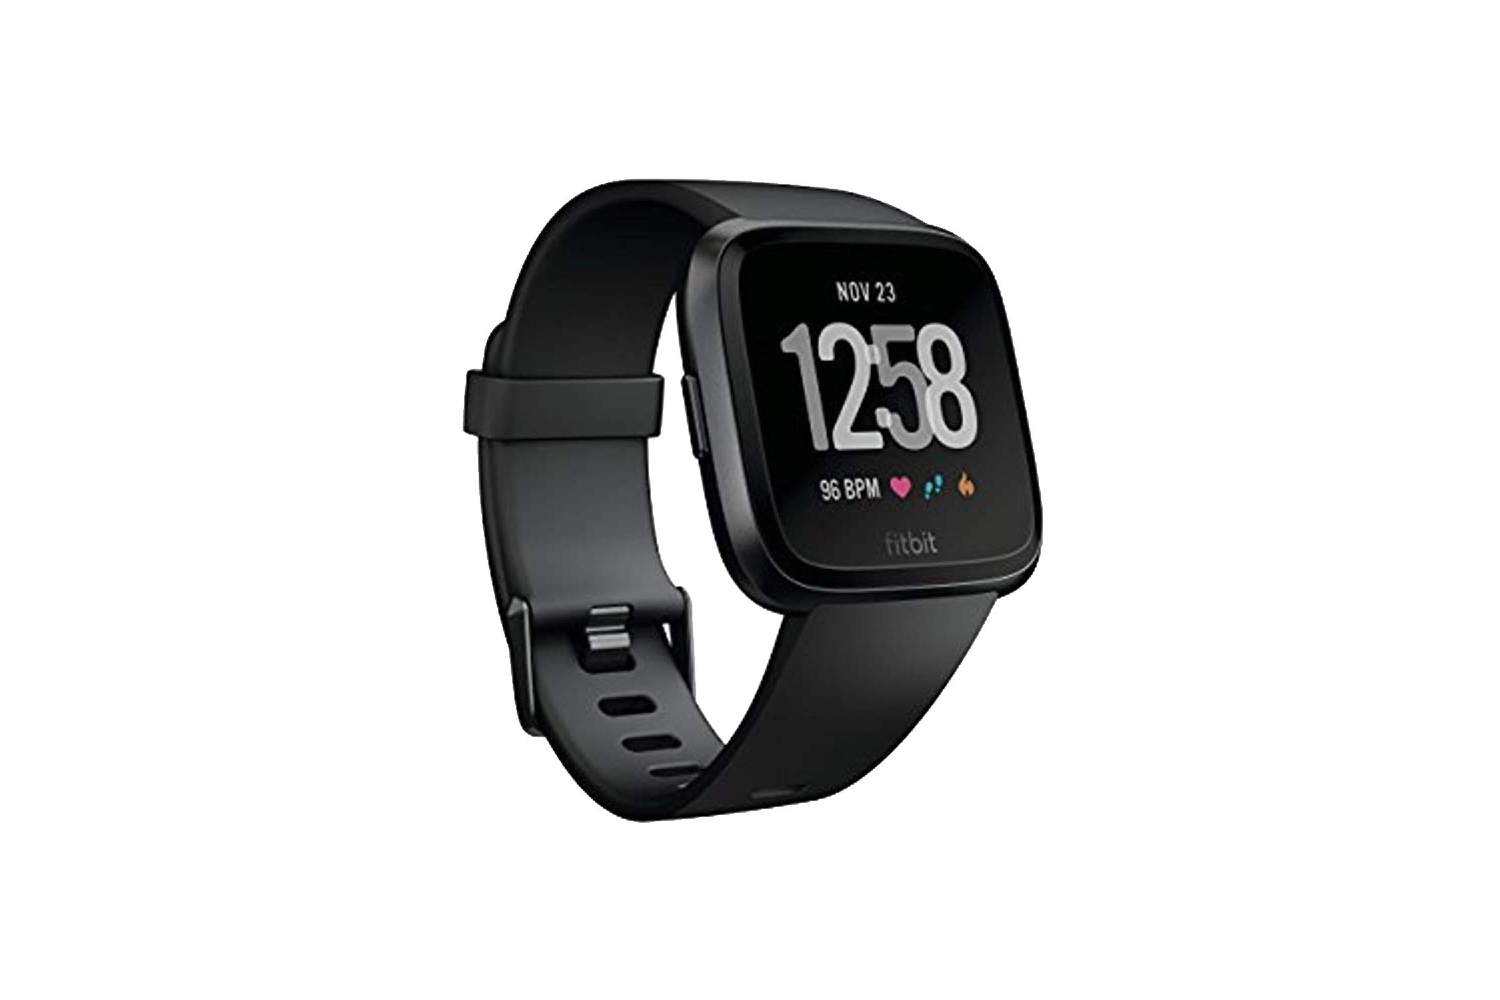  How to reset the Fitbit Versa